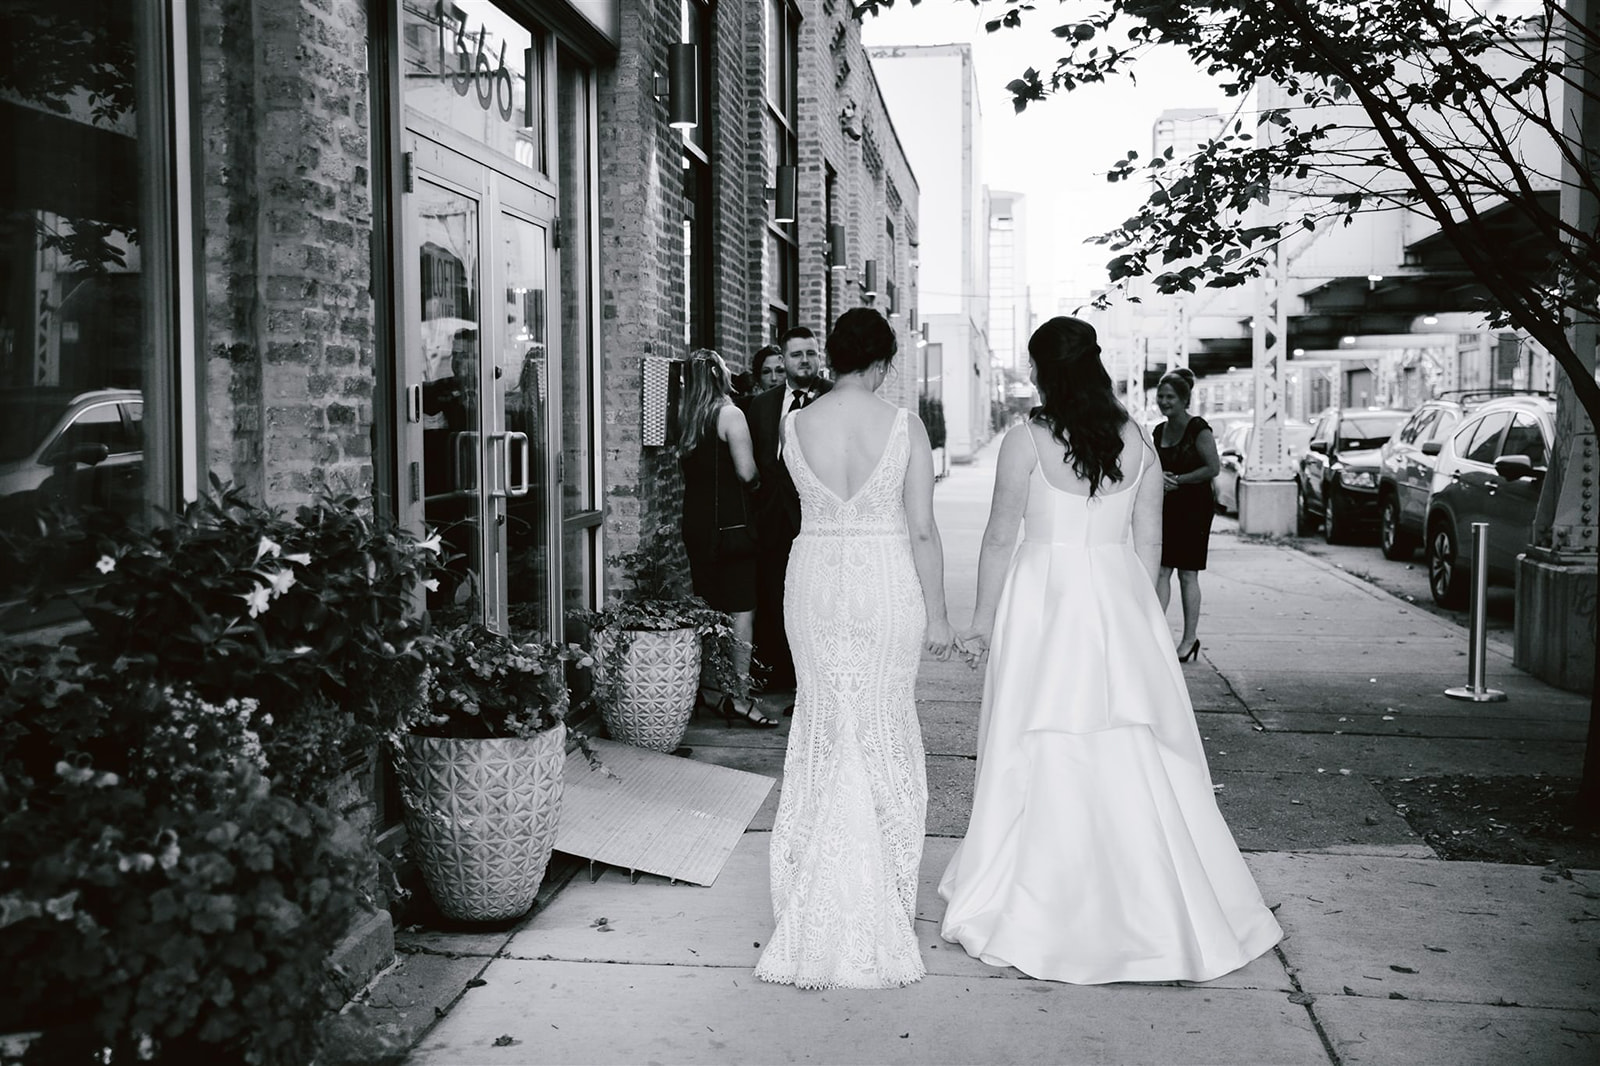 Two brides walking towards Loft on Lake, their love and anticipation evident as they head to their wedding celebration.